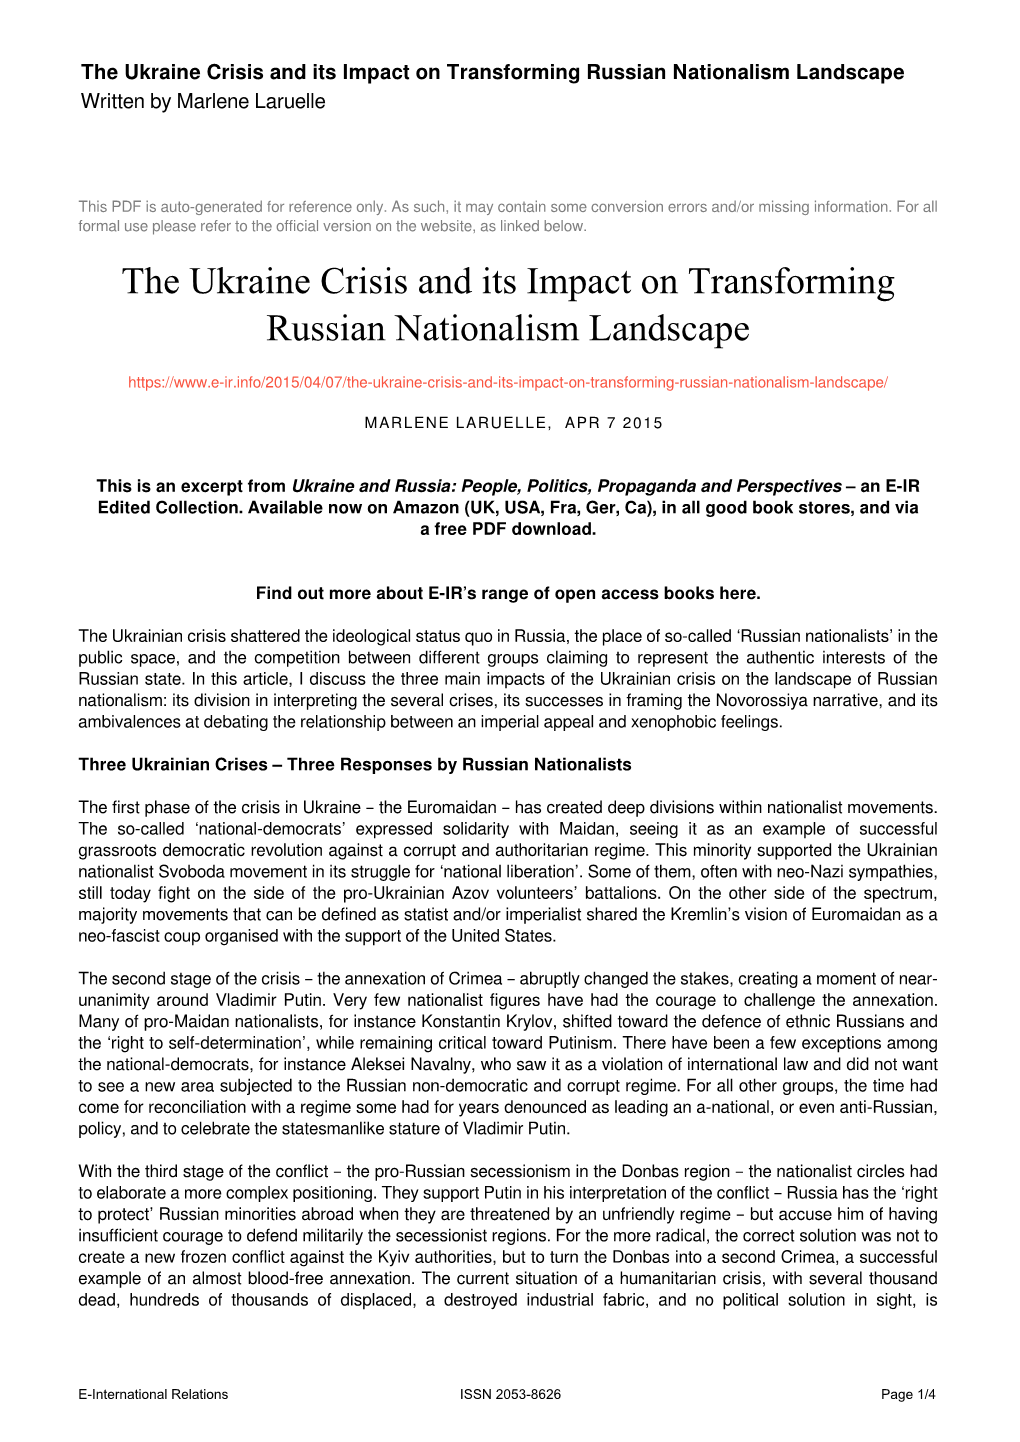 The Ukraine Crisis and Its Impact on Transforming Russian Nationalism Landscape Written by Marlene Laruelle